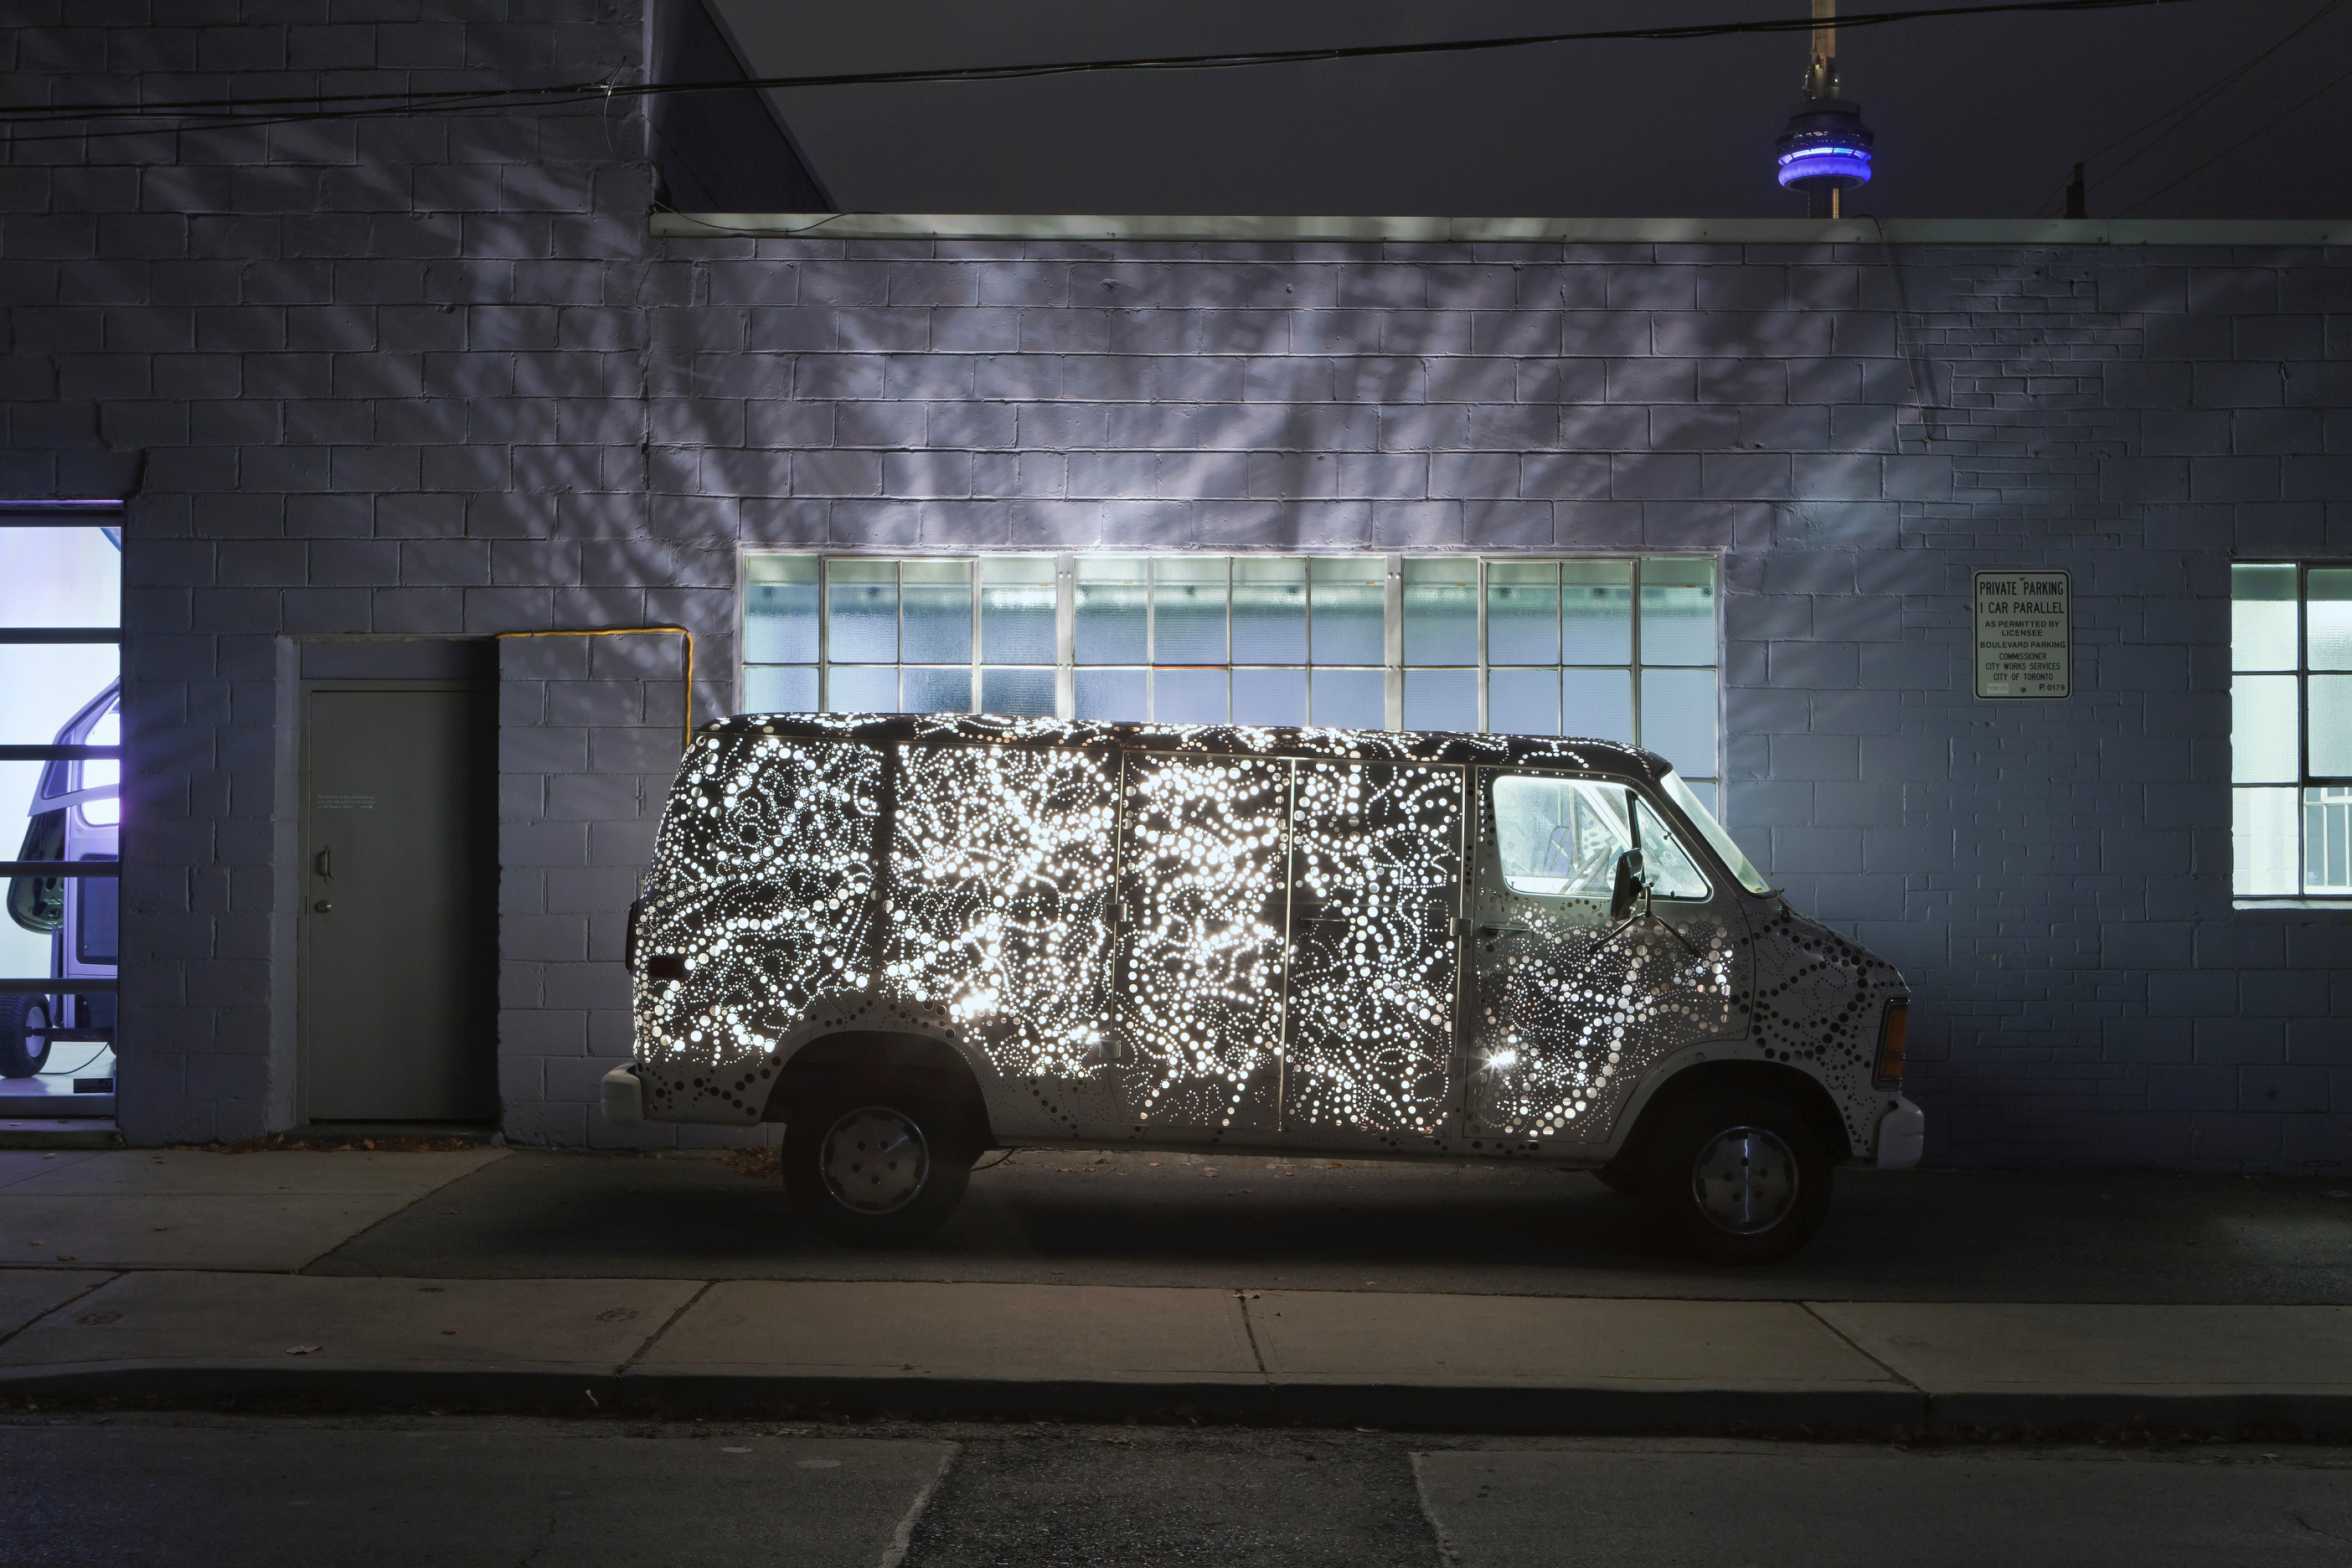 Kim Adams' Auto Lamp is an intricately perforated van displayed on a dark sidewalk, casting ribbons of light on the brick building behind it